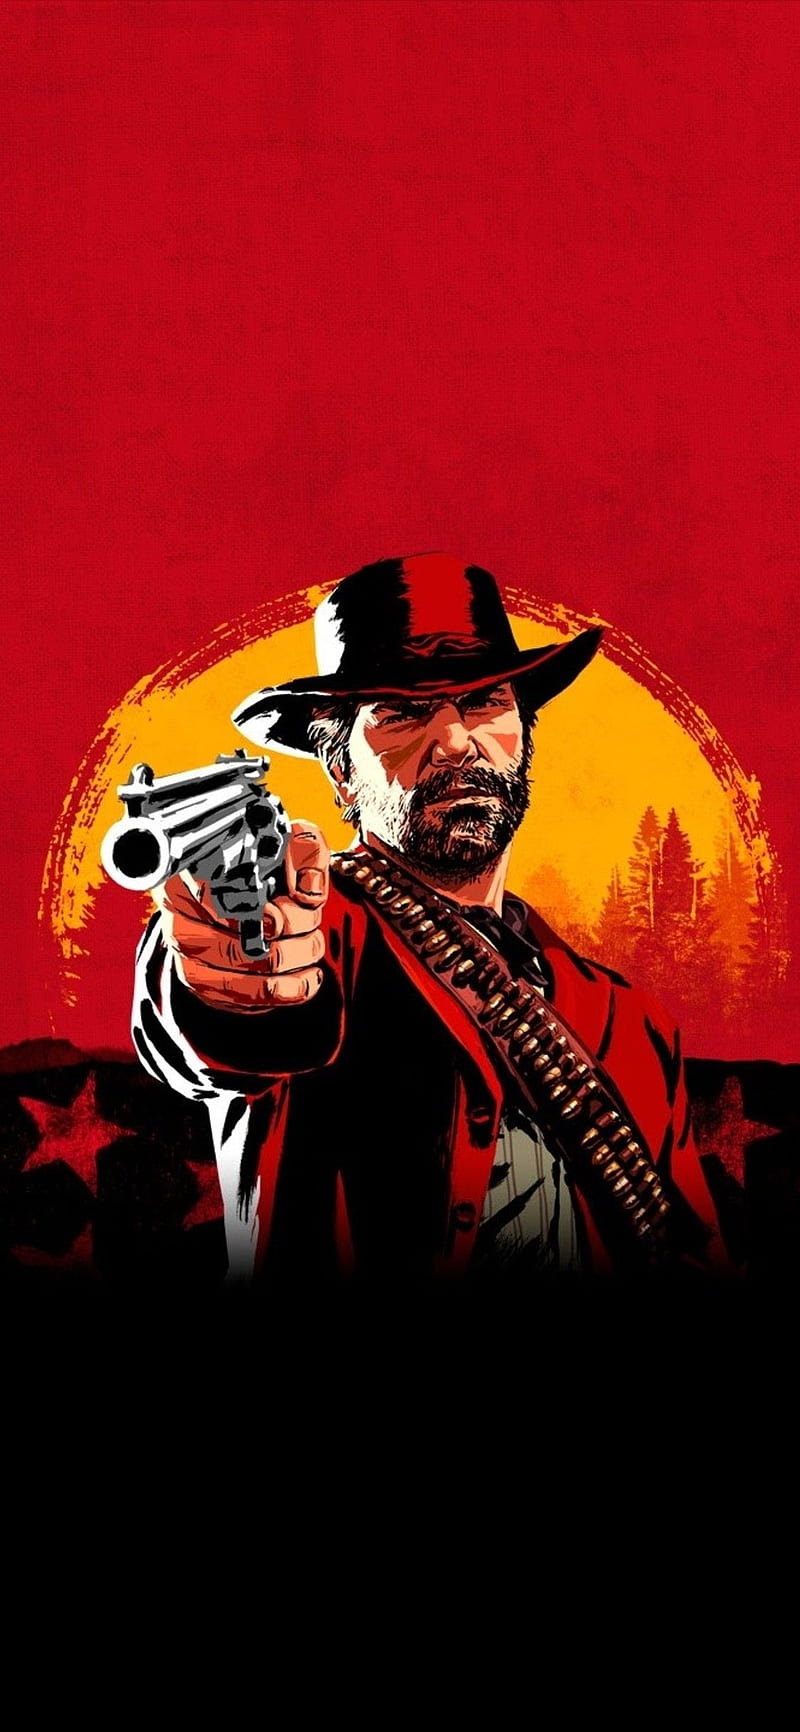 Red Dead Redemption2, game, red, rockstars, western, redemption, xbox, play station, HD phone wallpaper